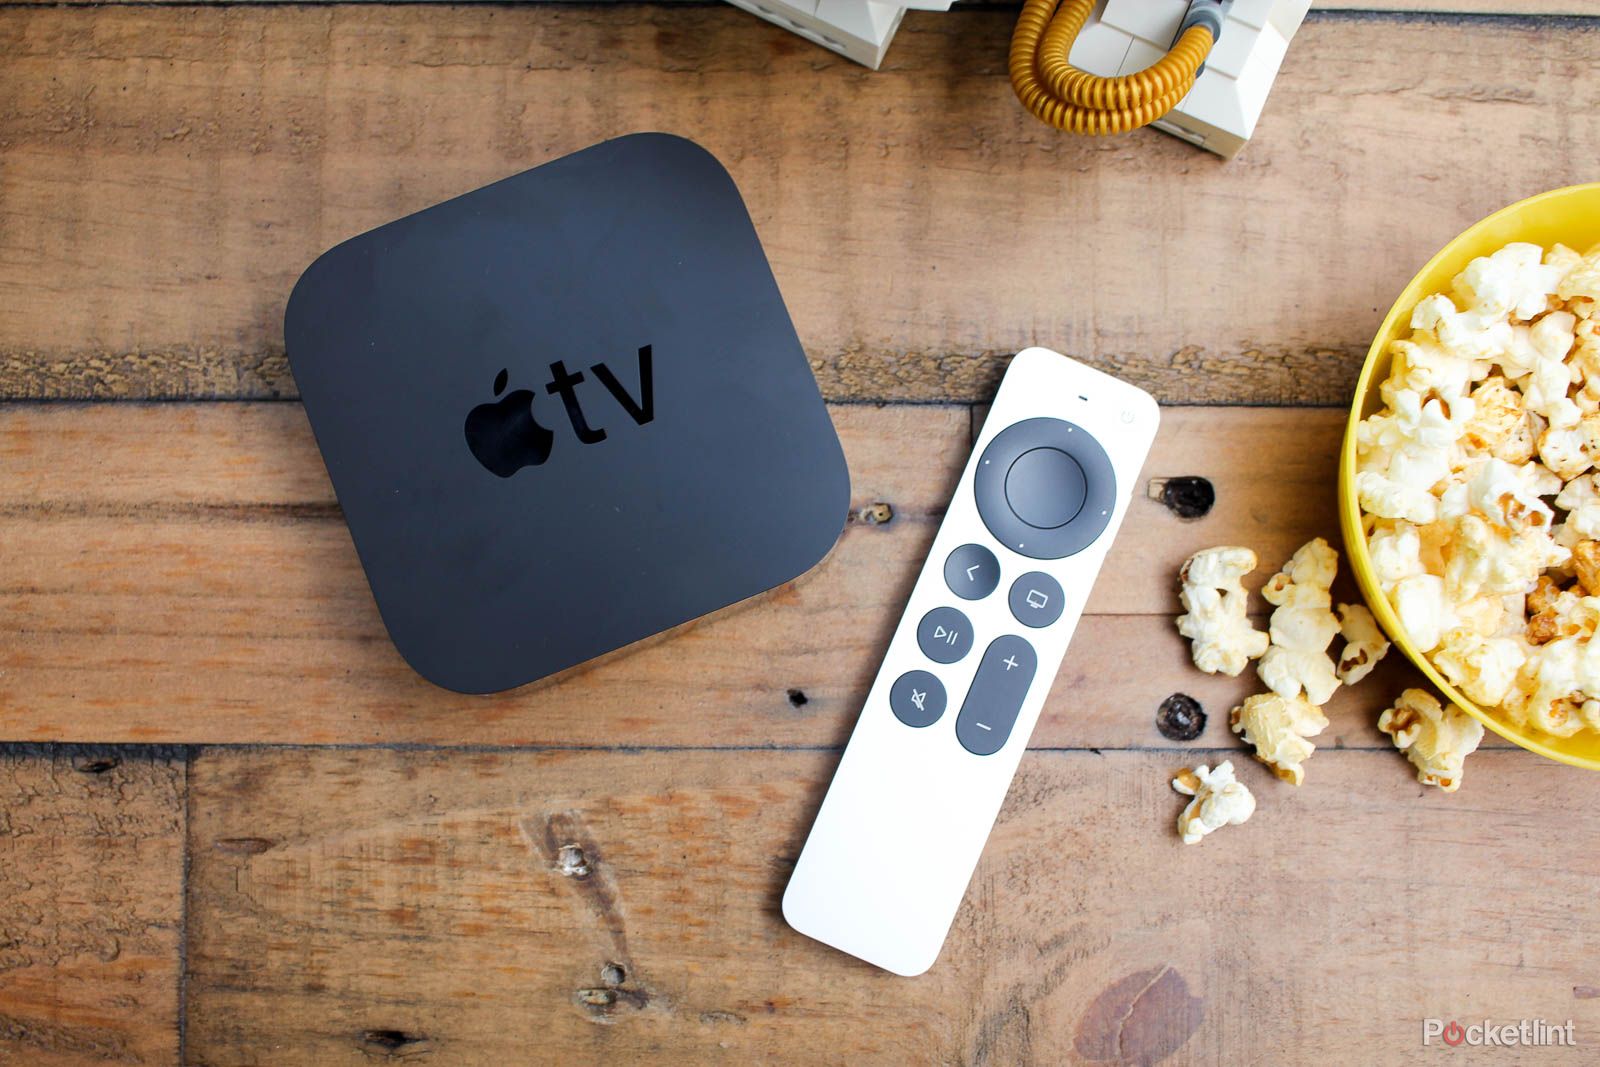 You can finally watch ad-supported Netflix on your Apple TV